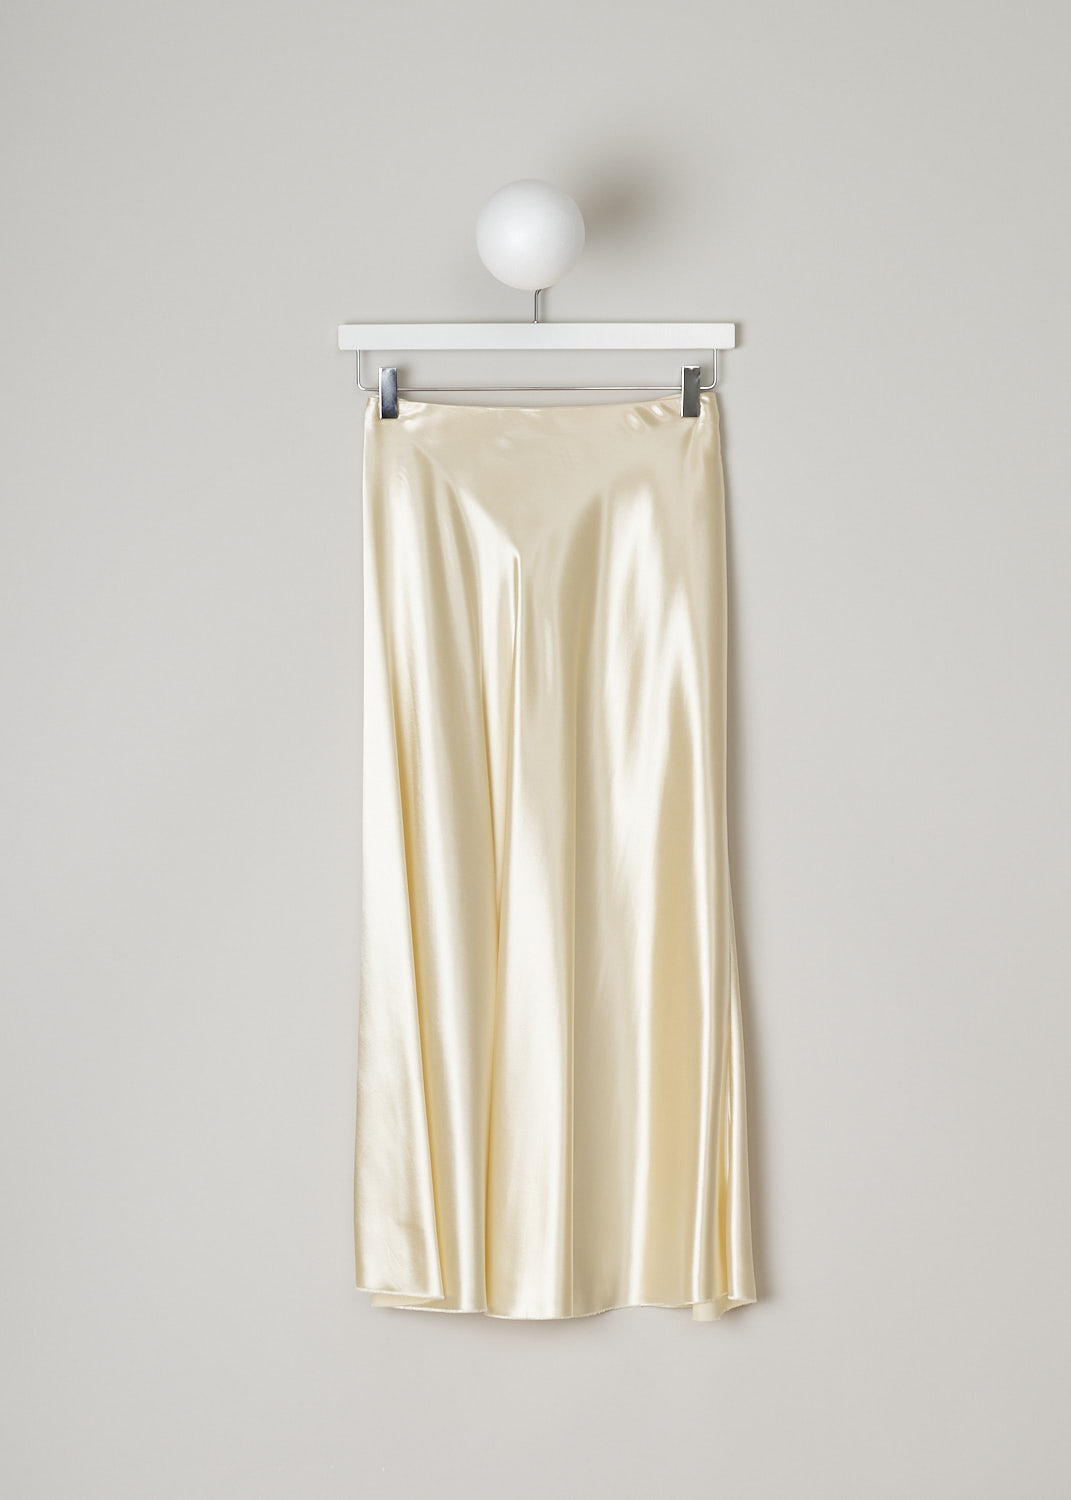 THE ROW, SATIN MEDELA SKIRT IN VANILLA, MEDELA_SKIRT_I068WI_723_VANILLA, Beige, White, Back, This flared vanilla yellow satin skirt has an elasticated waistband and a concealed side zip that functions as the closure option. The skirt has an asymmetrical hemline with a raw finish. 

